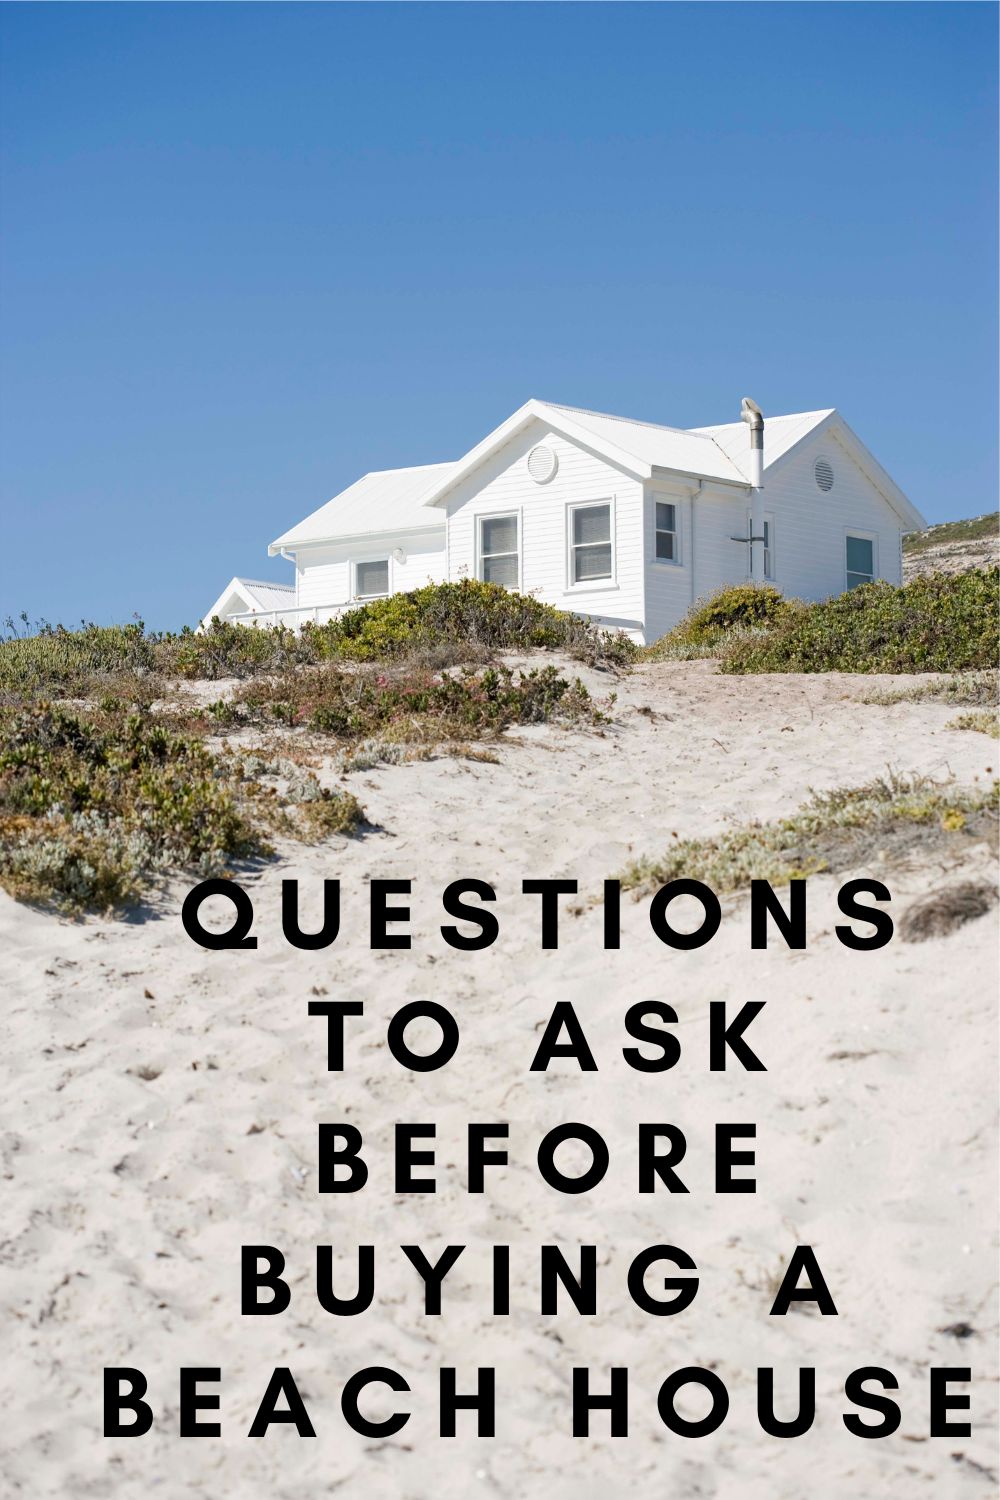 Questions to Ask Before Buying a Beach House